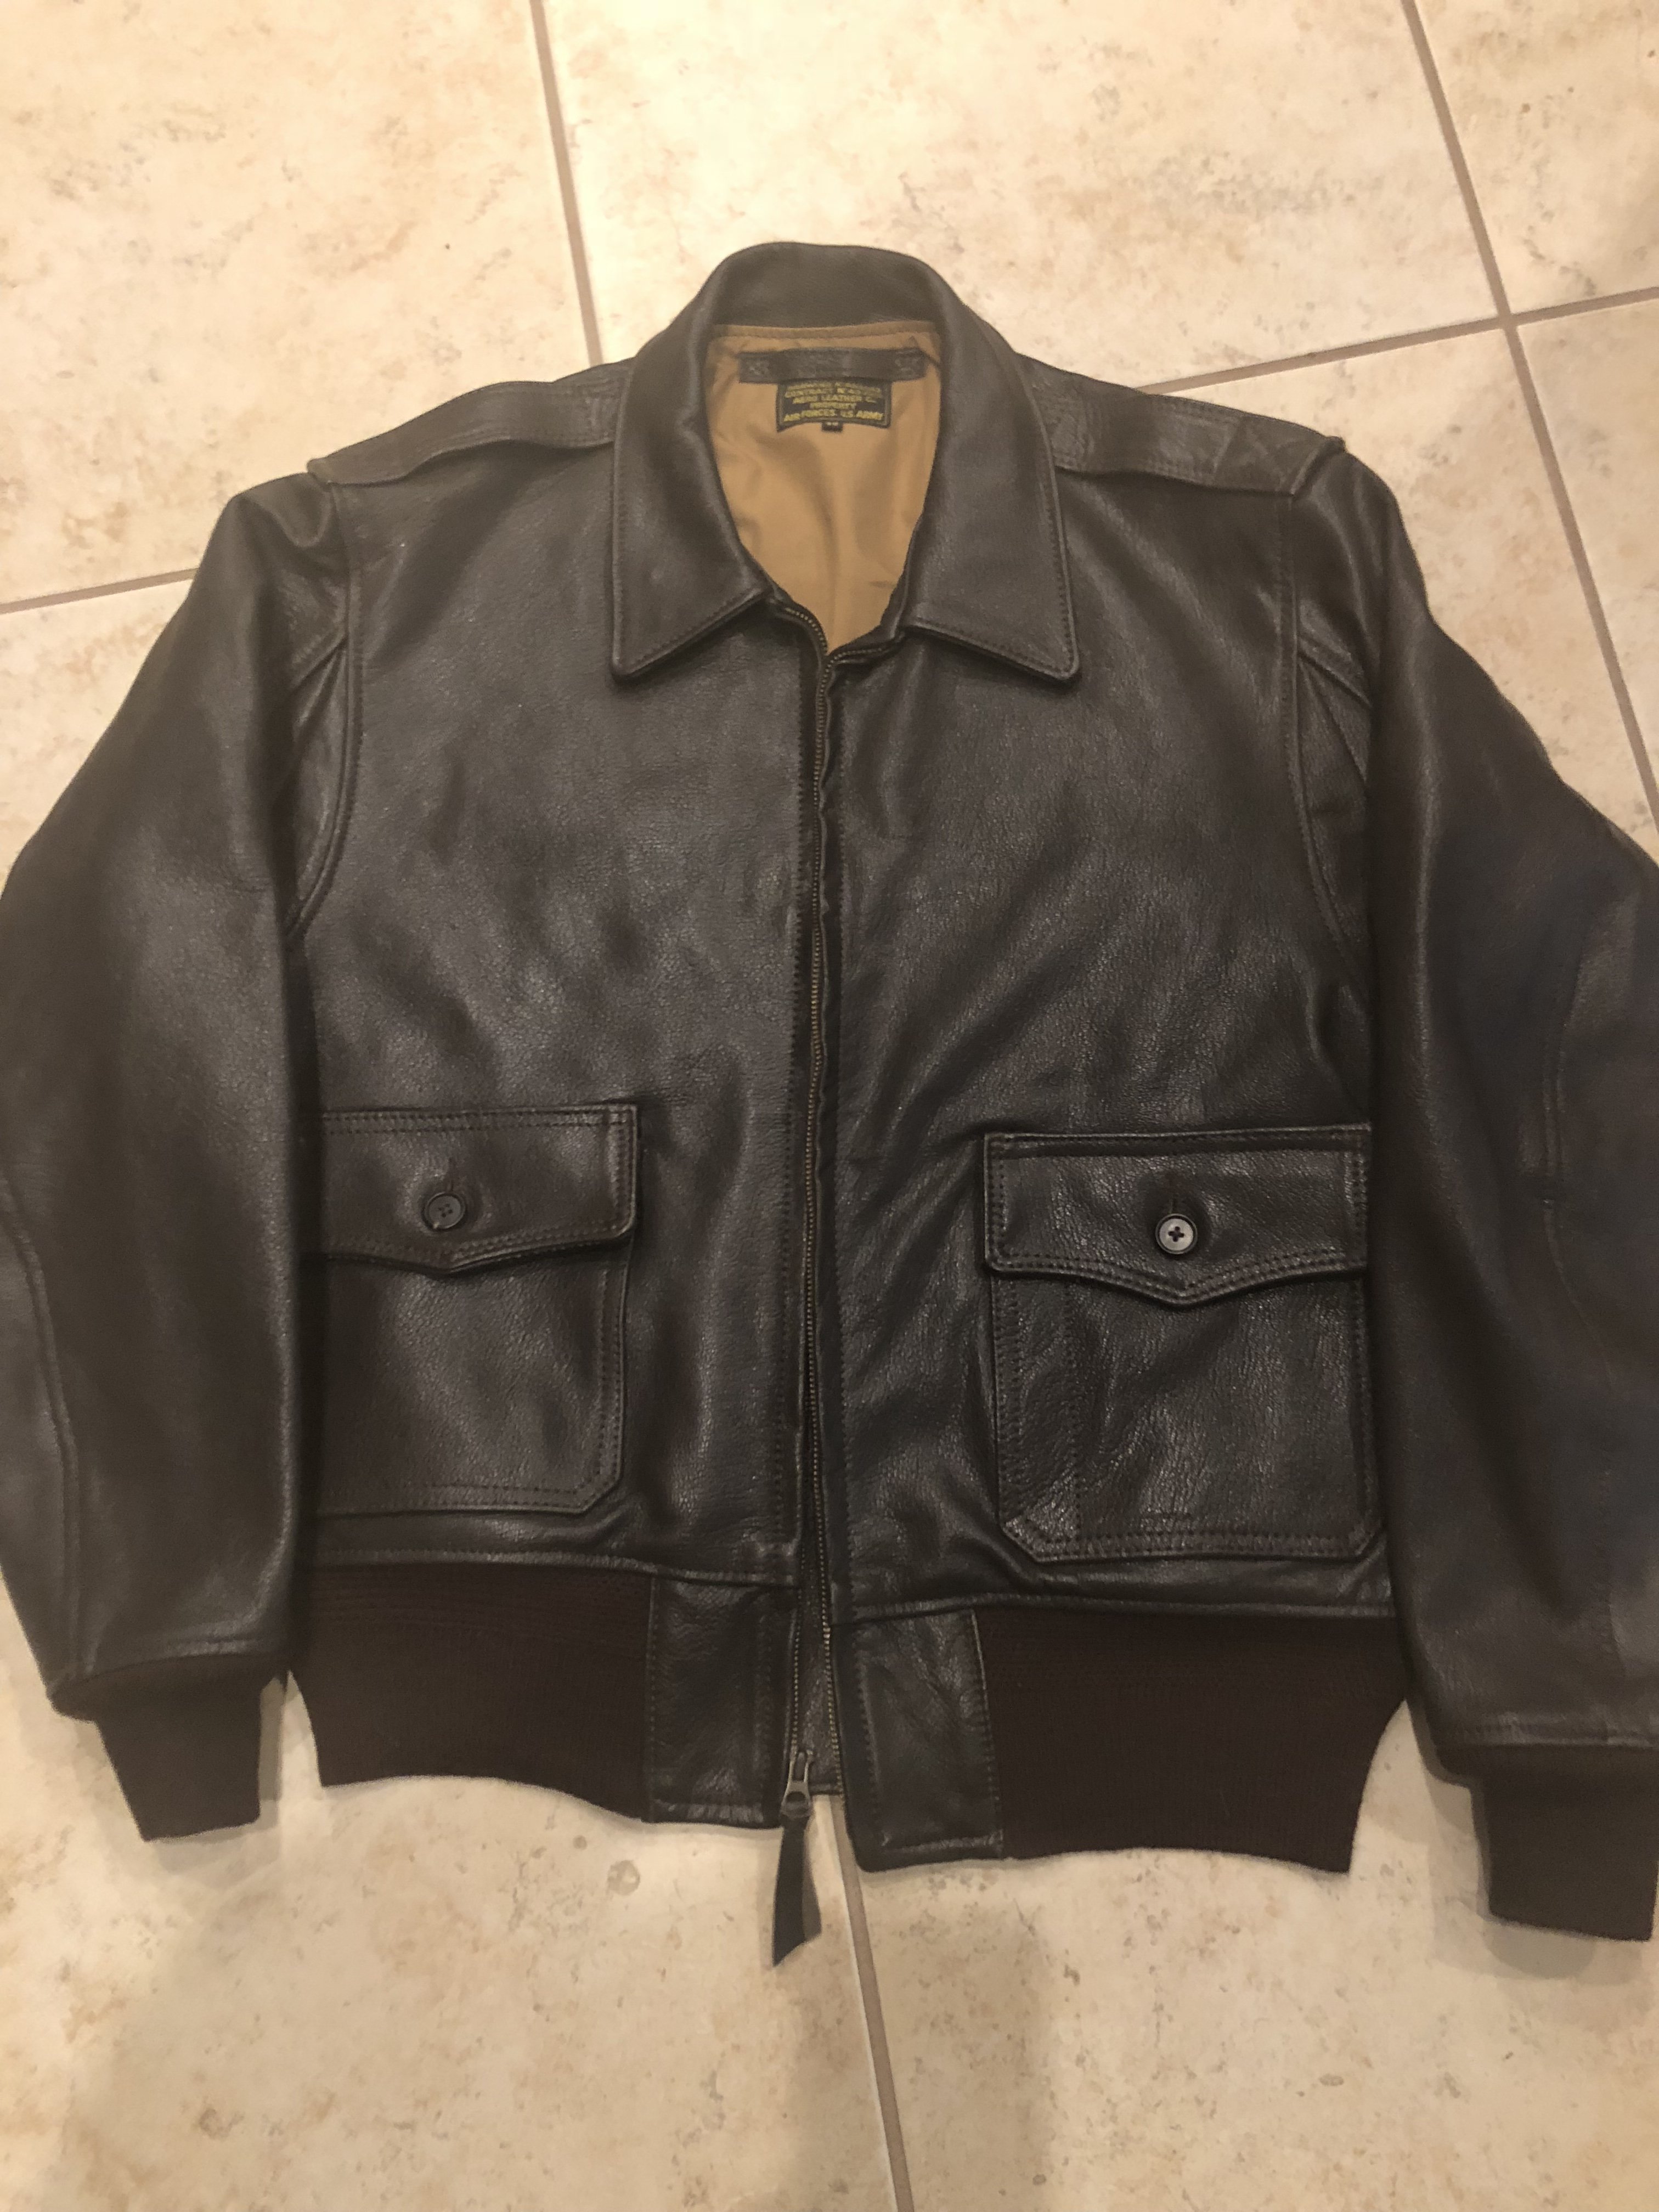 Aero AN-J-3 Goatskin and What a Deal. | Vintage Leather Jackets Forum